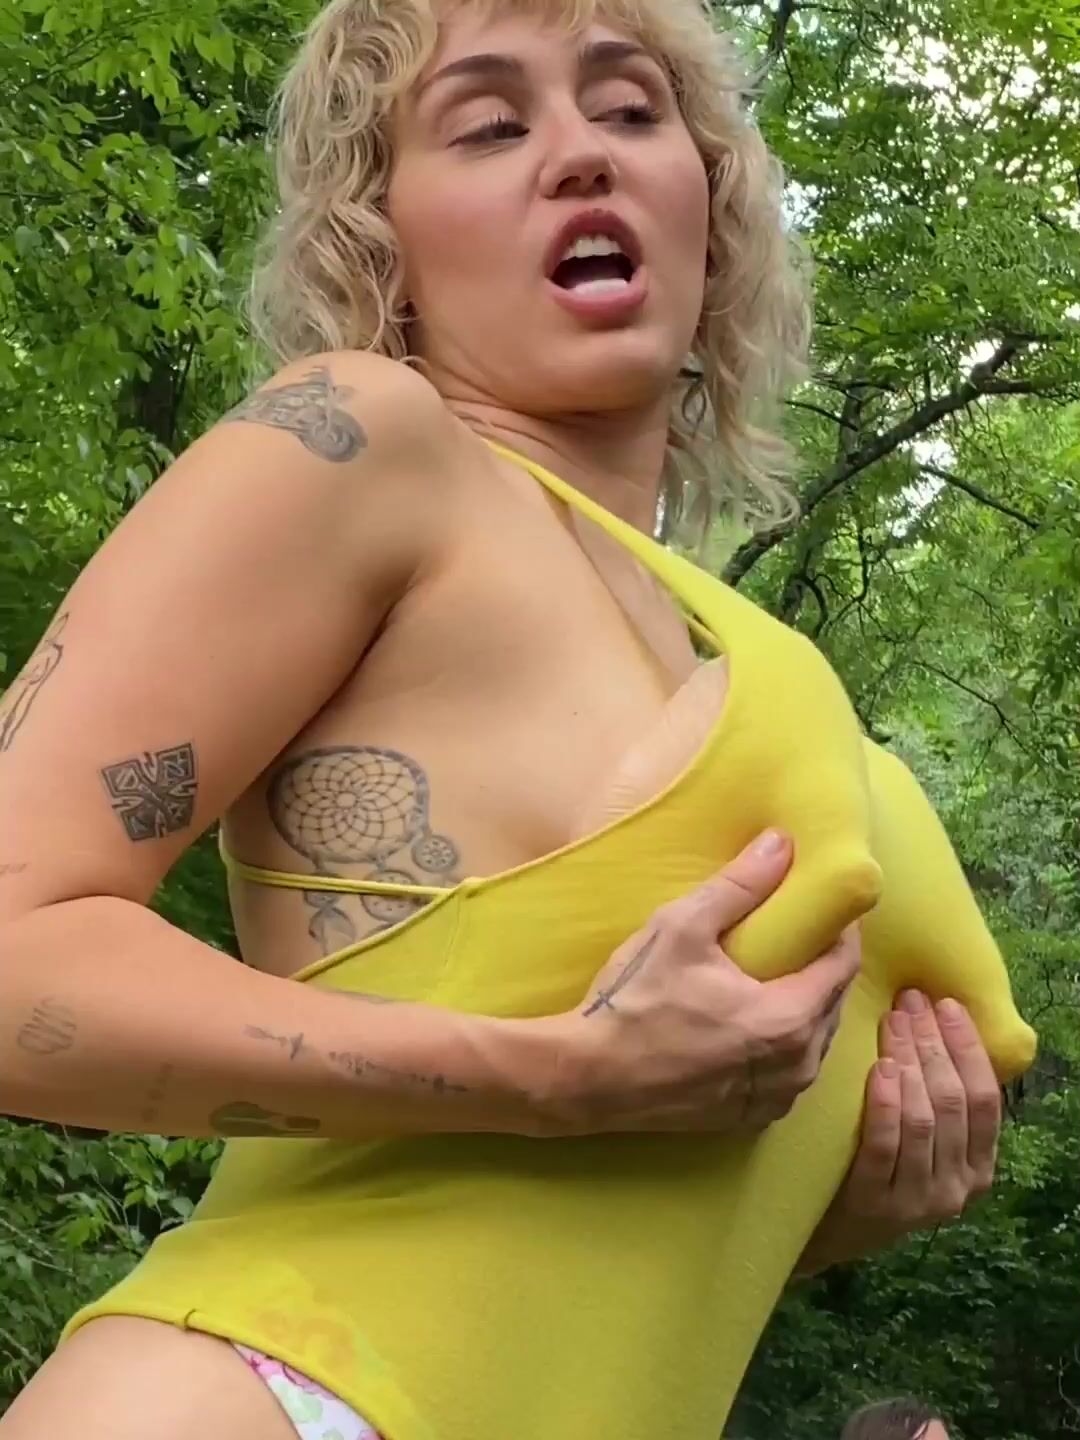 miley cyrus Swimsuit and puffy nipples